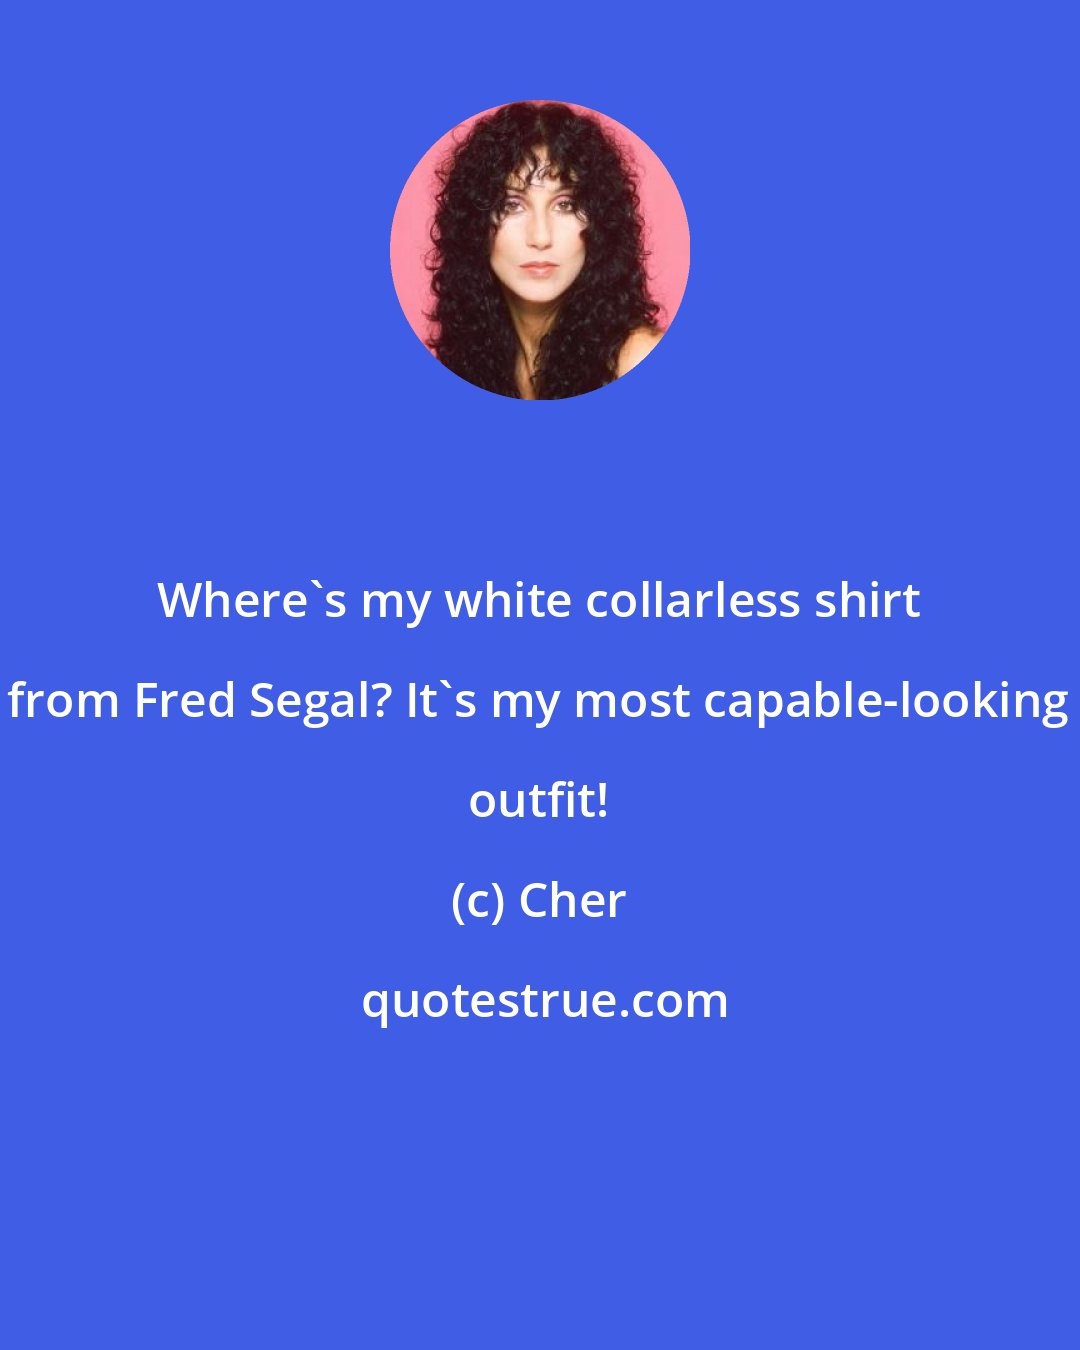 Cher: Where's my white collarless shirt from Fred Segal? It's my most capable-looking outfit!